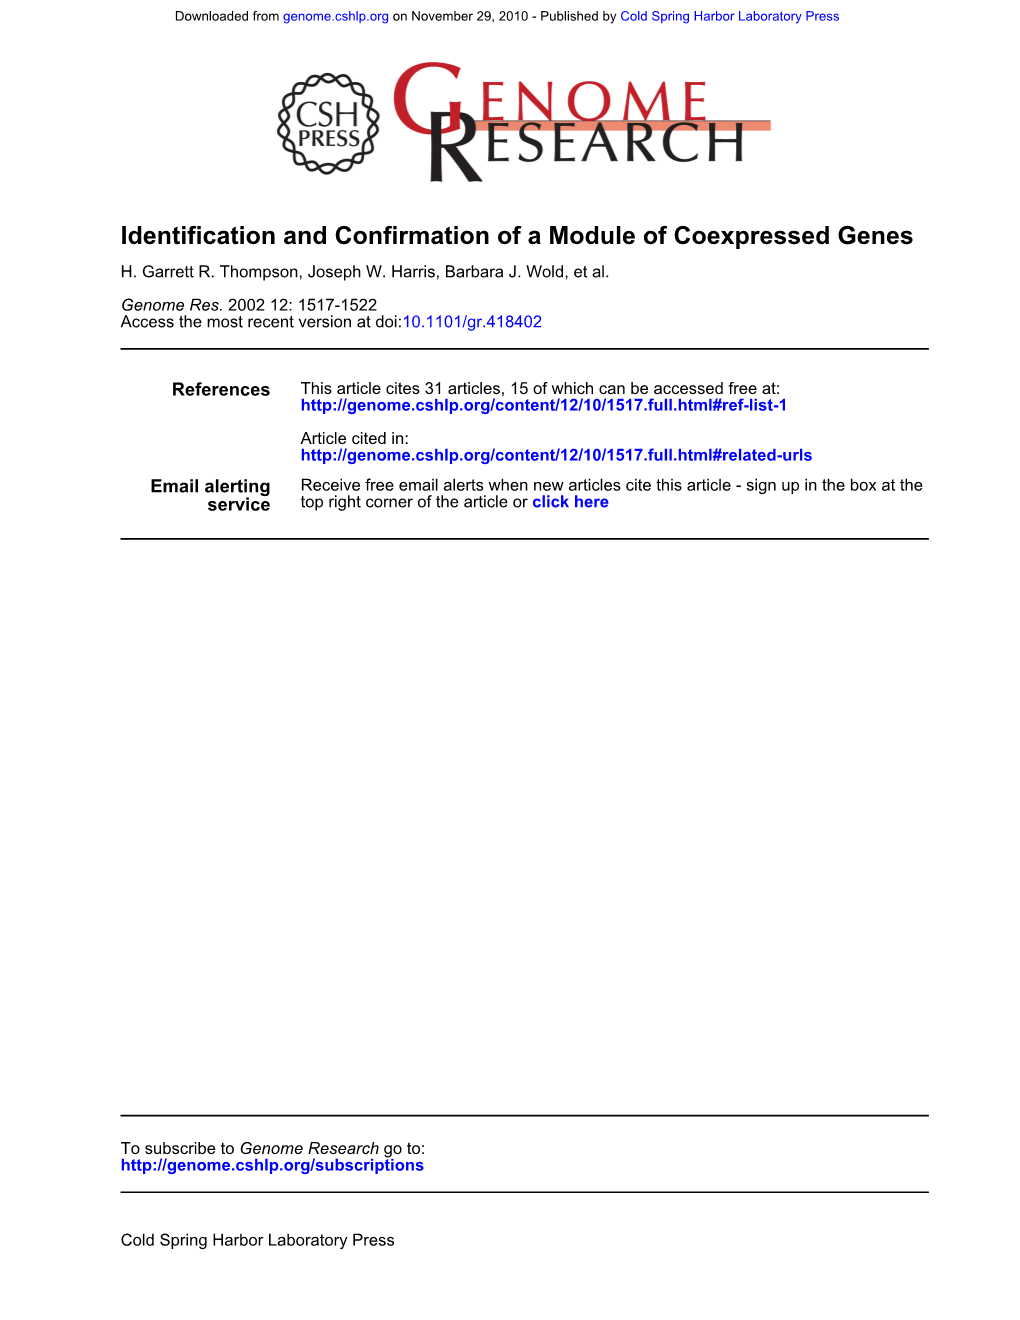 Identification and Confirmation of a Module of Coexpressed Genes